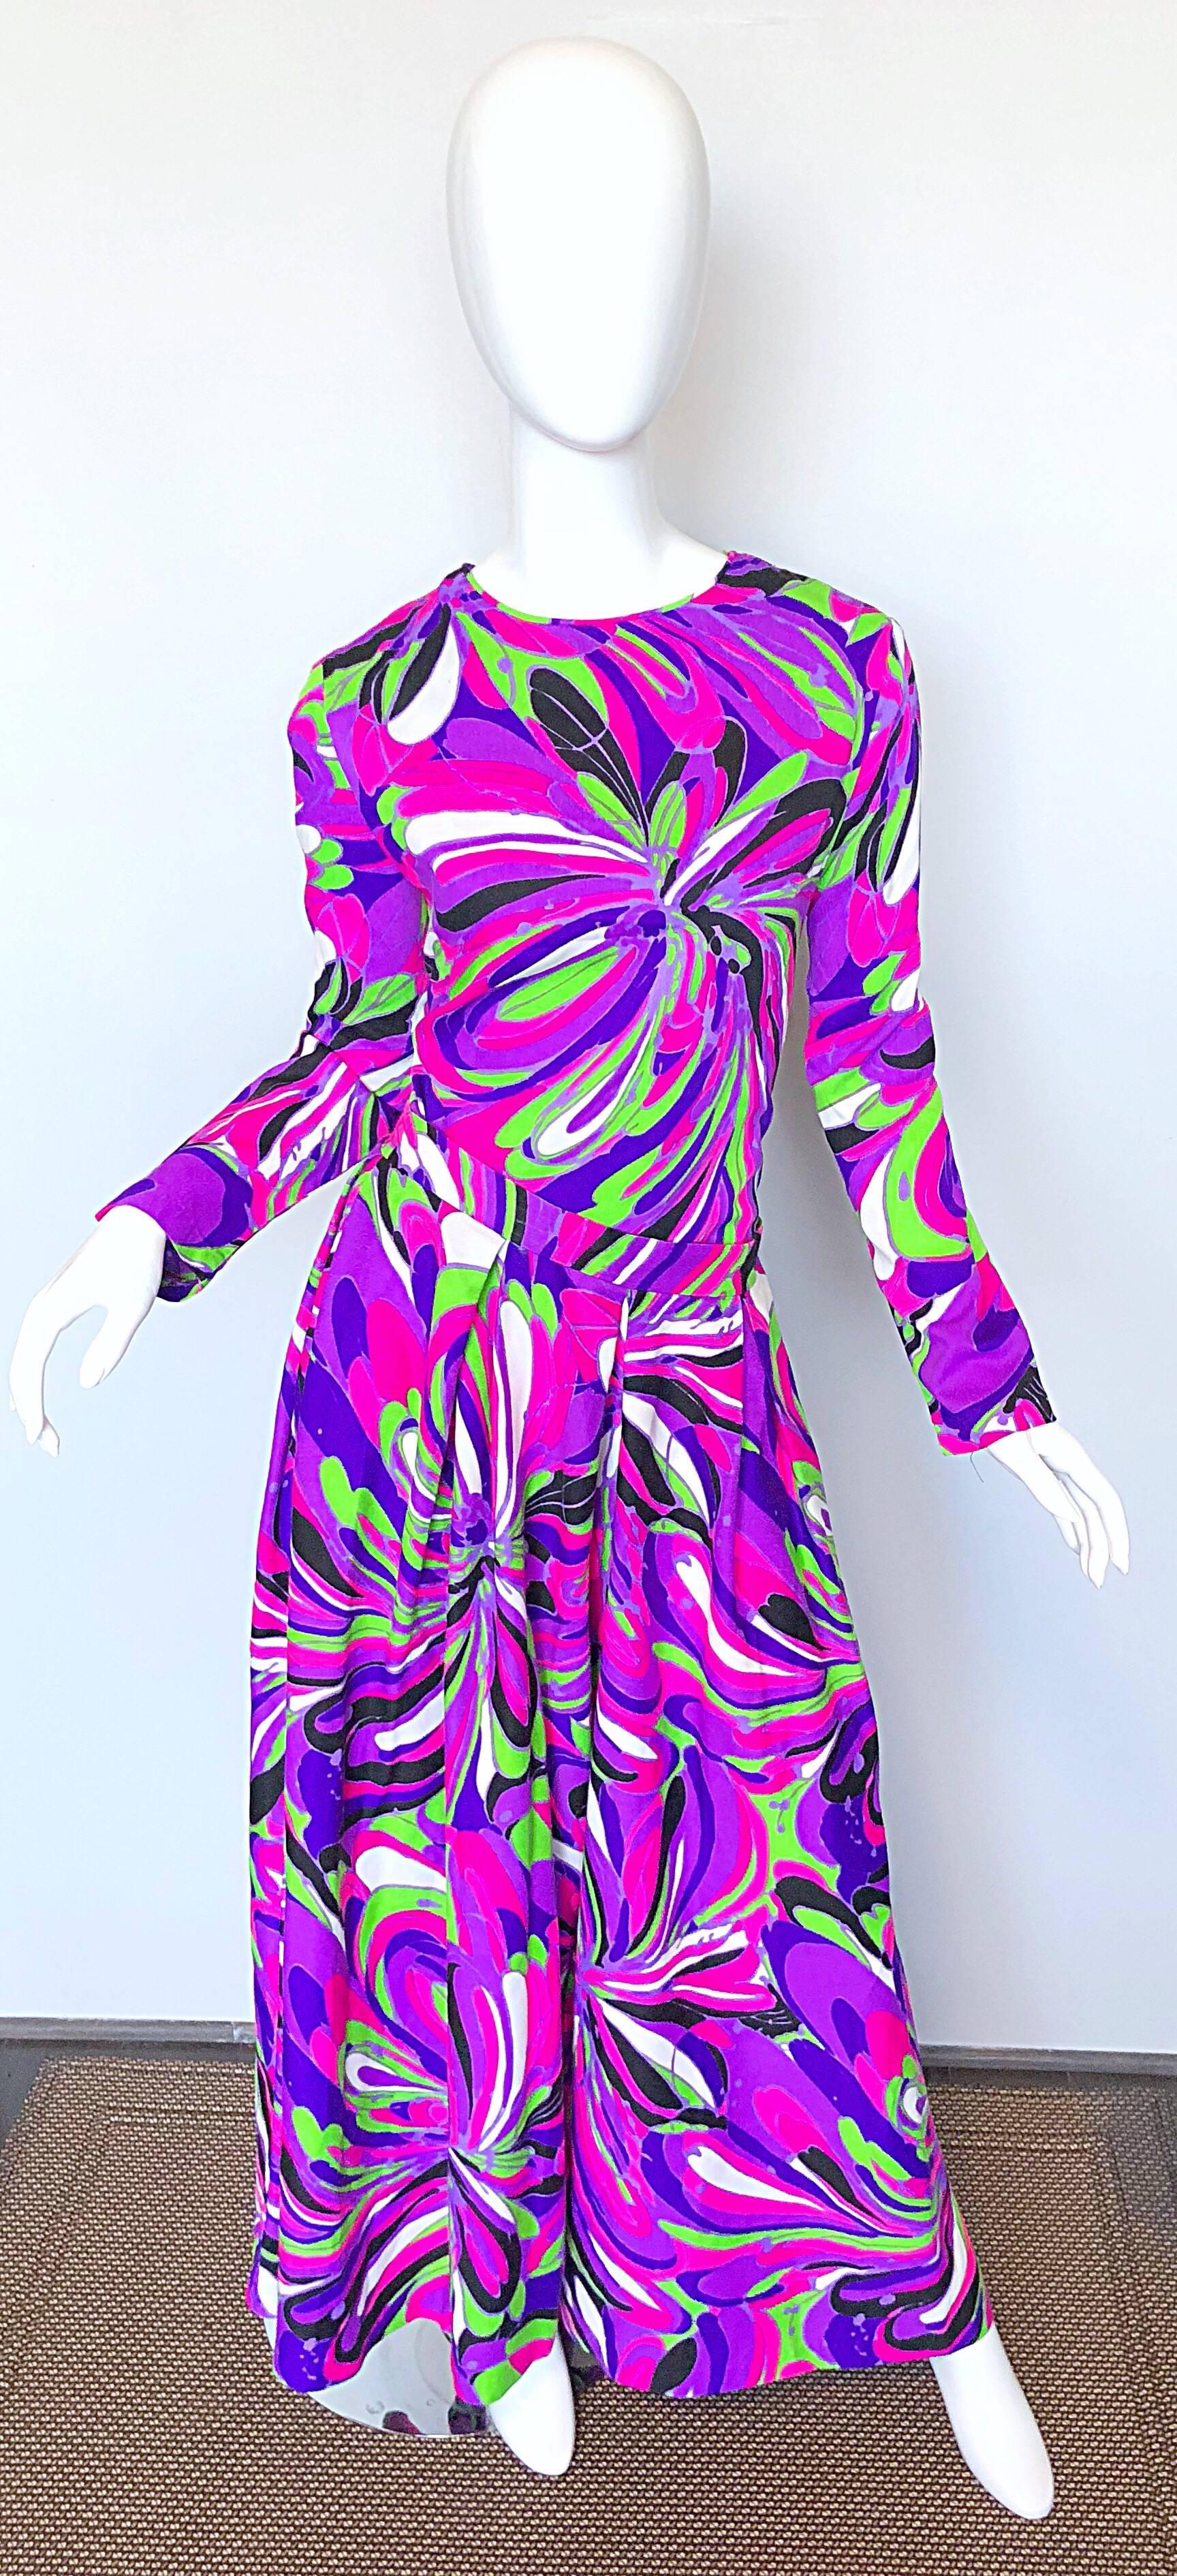 Amazing vintage early 70s psychedelic long sleeve blouse and wide leg slightly cropped palazzo pants! Looks like a jumpsuit, but not! Both pieces are great as separates.
Features abstract kaleidoscope prints in bright colors of purple, fuchsia,